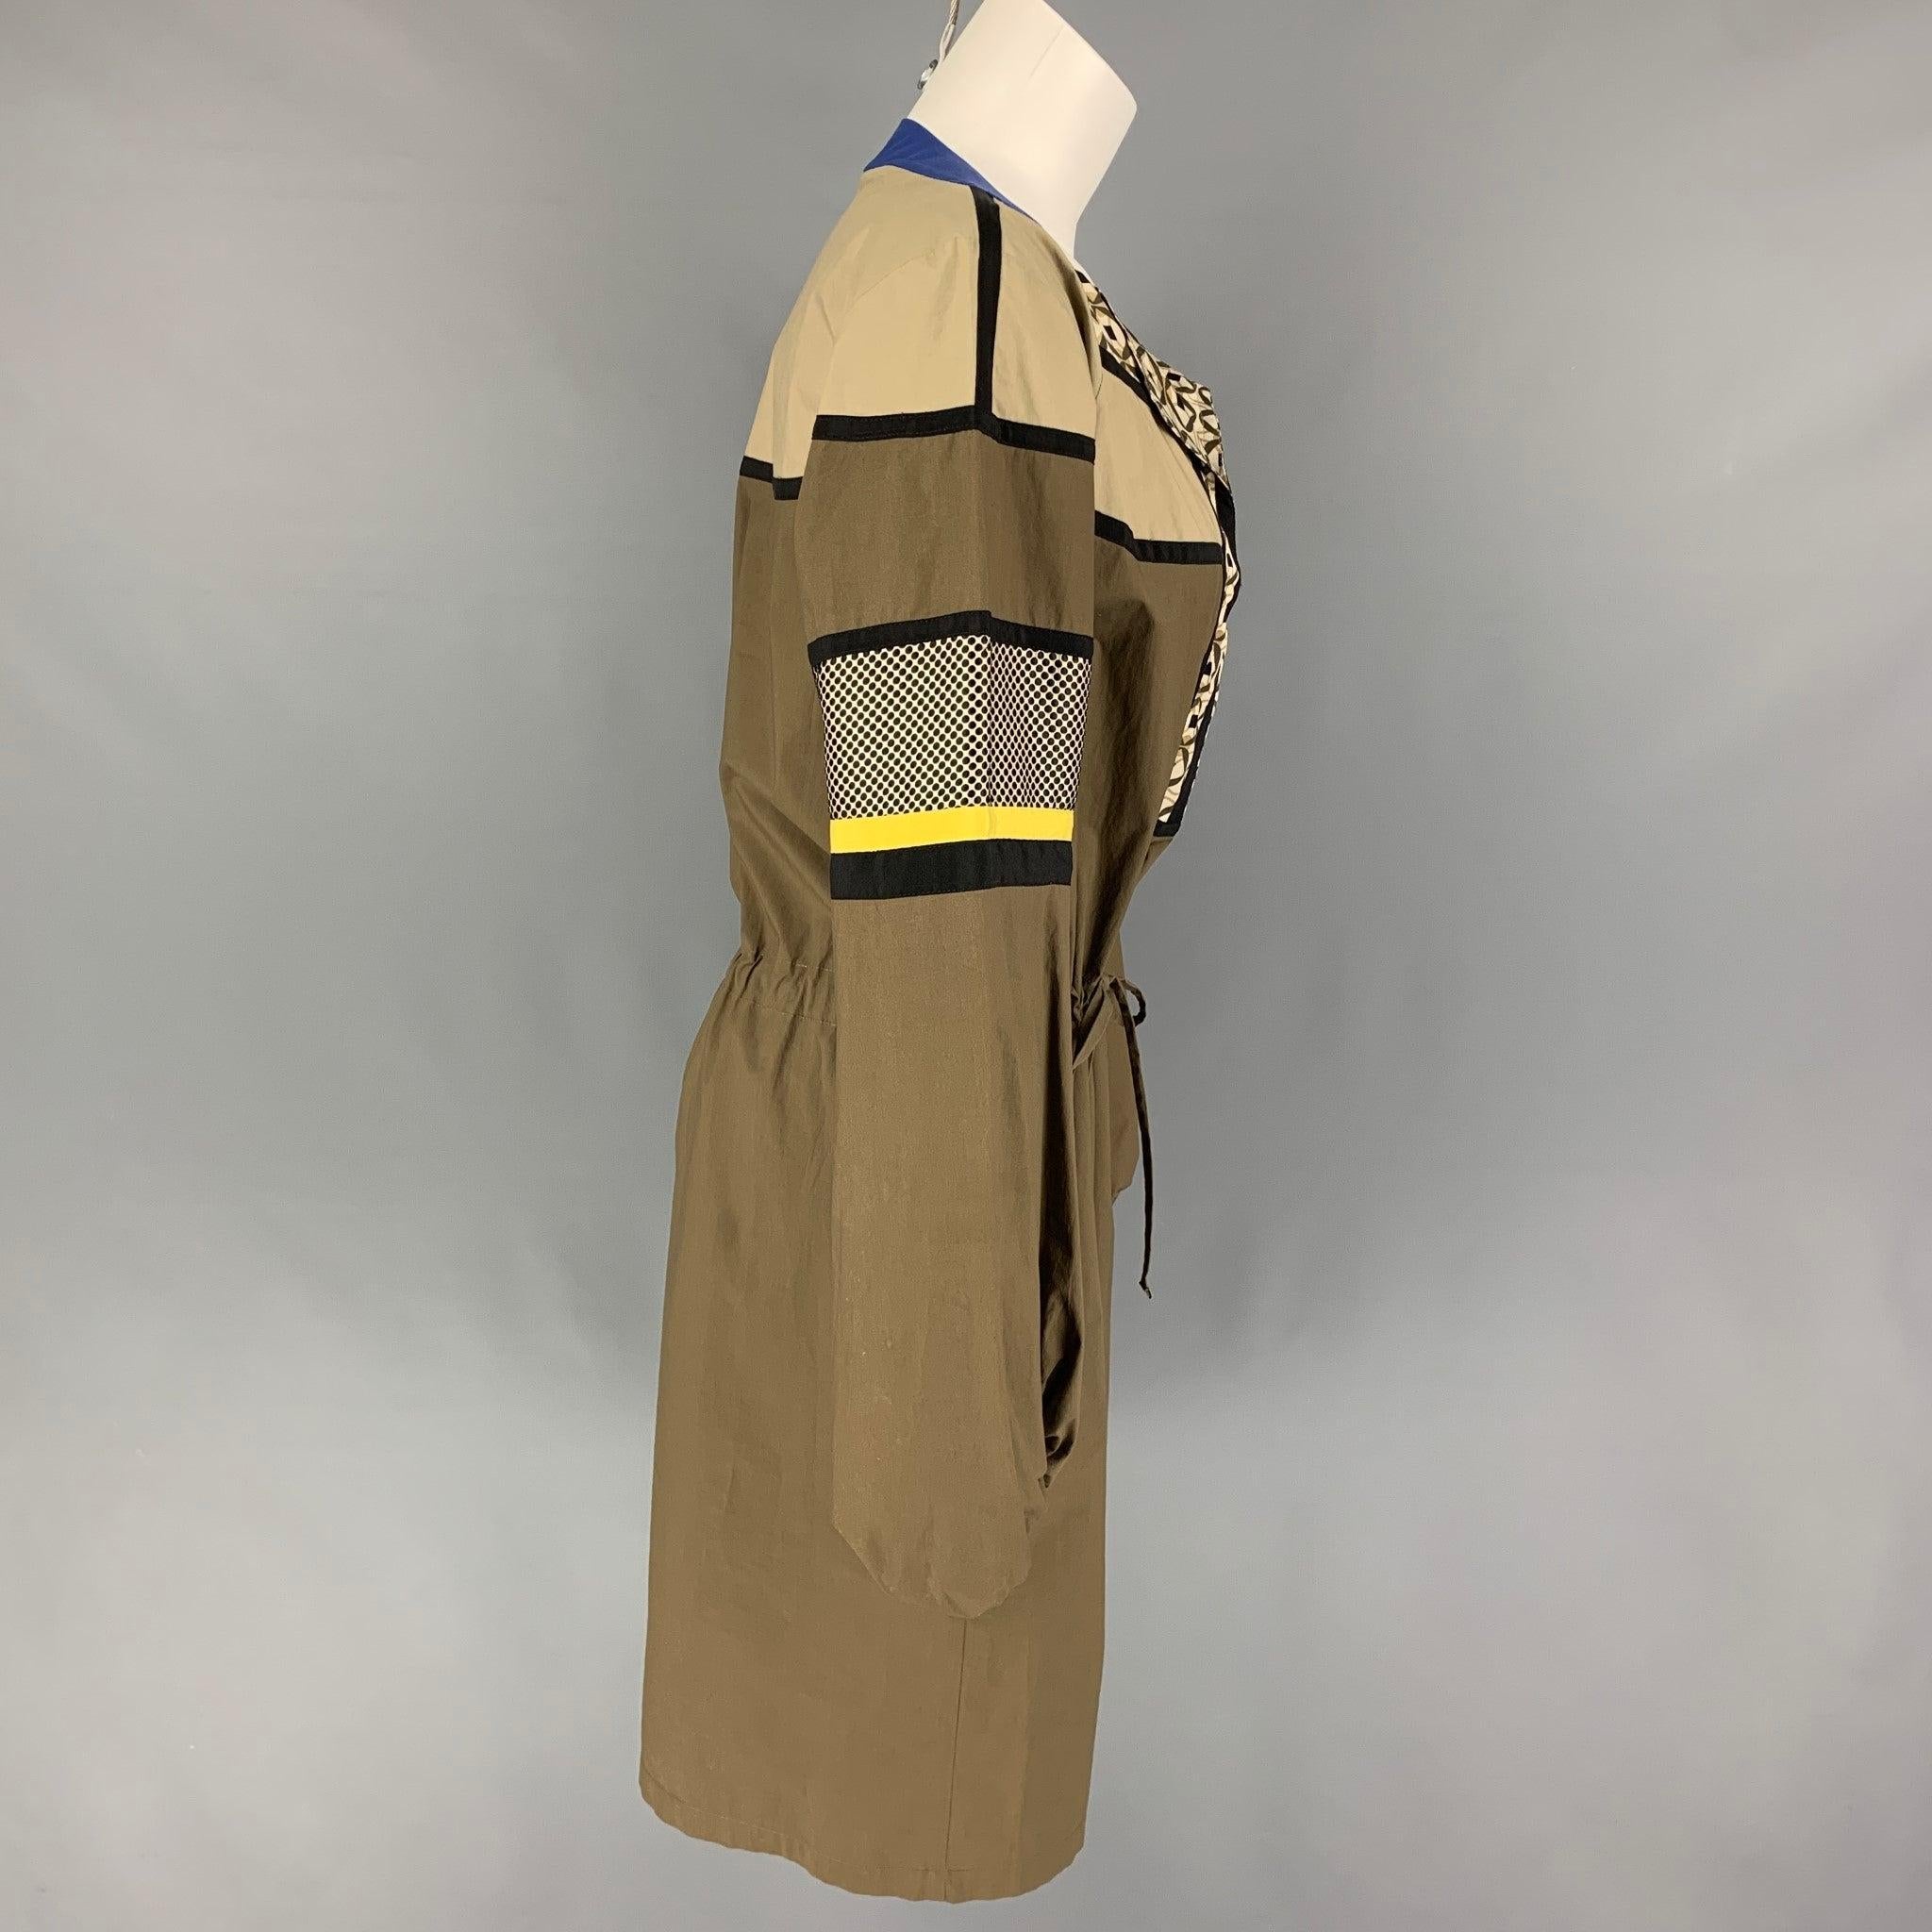 ETRO dress comes in a taupe & black cotton blend with mixed patterns featuring a waist drawstring, elastic hem, and a v-neck. Made in Italy.
Very Good
Pre-Owned Condition. Light
wear. As-Is.  

Marked:   48 

Measurements: 
 
Shoulder: 16.5 inches 